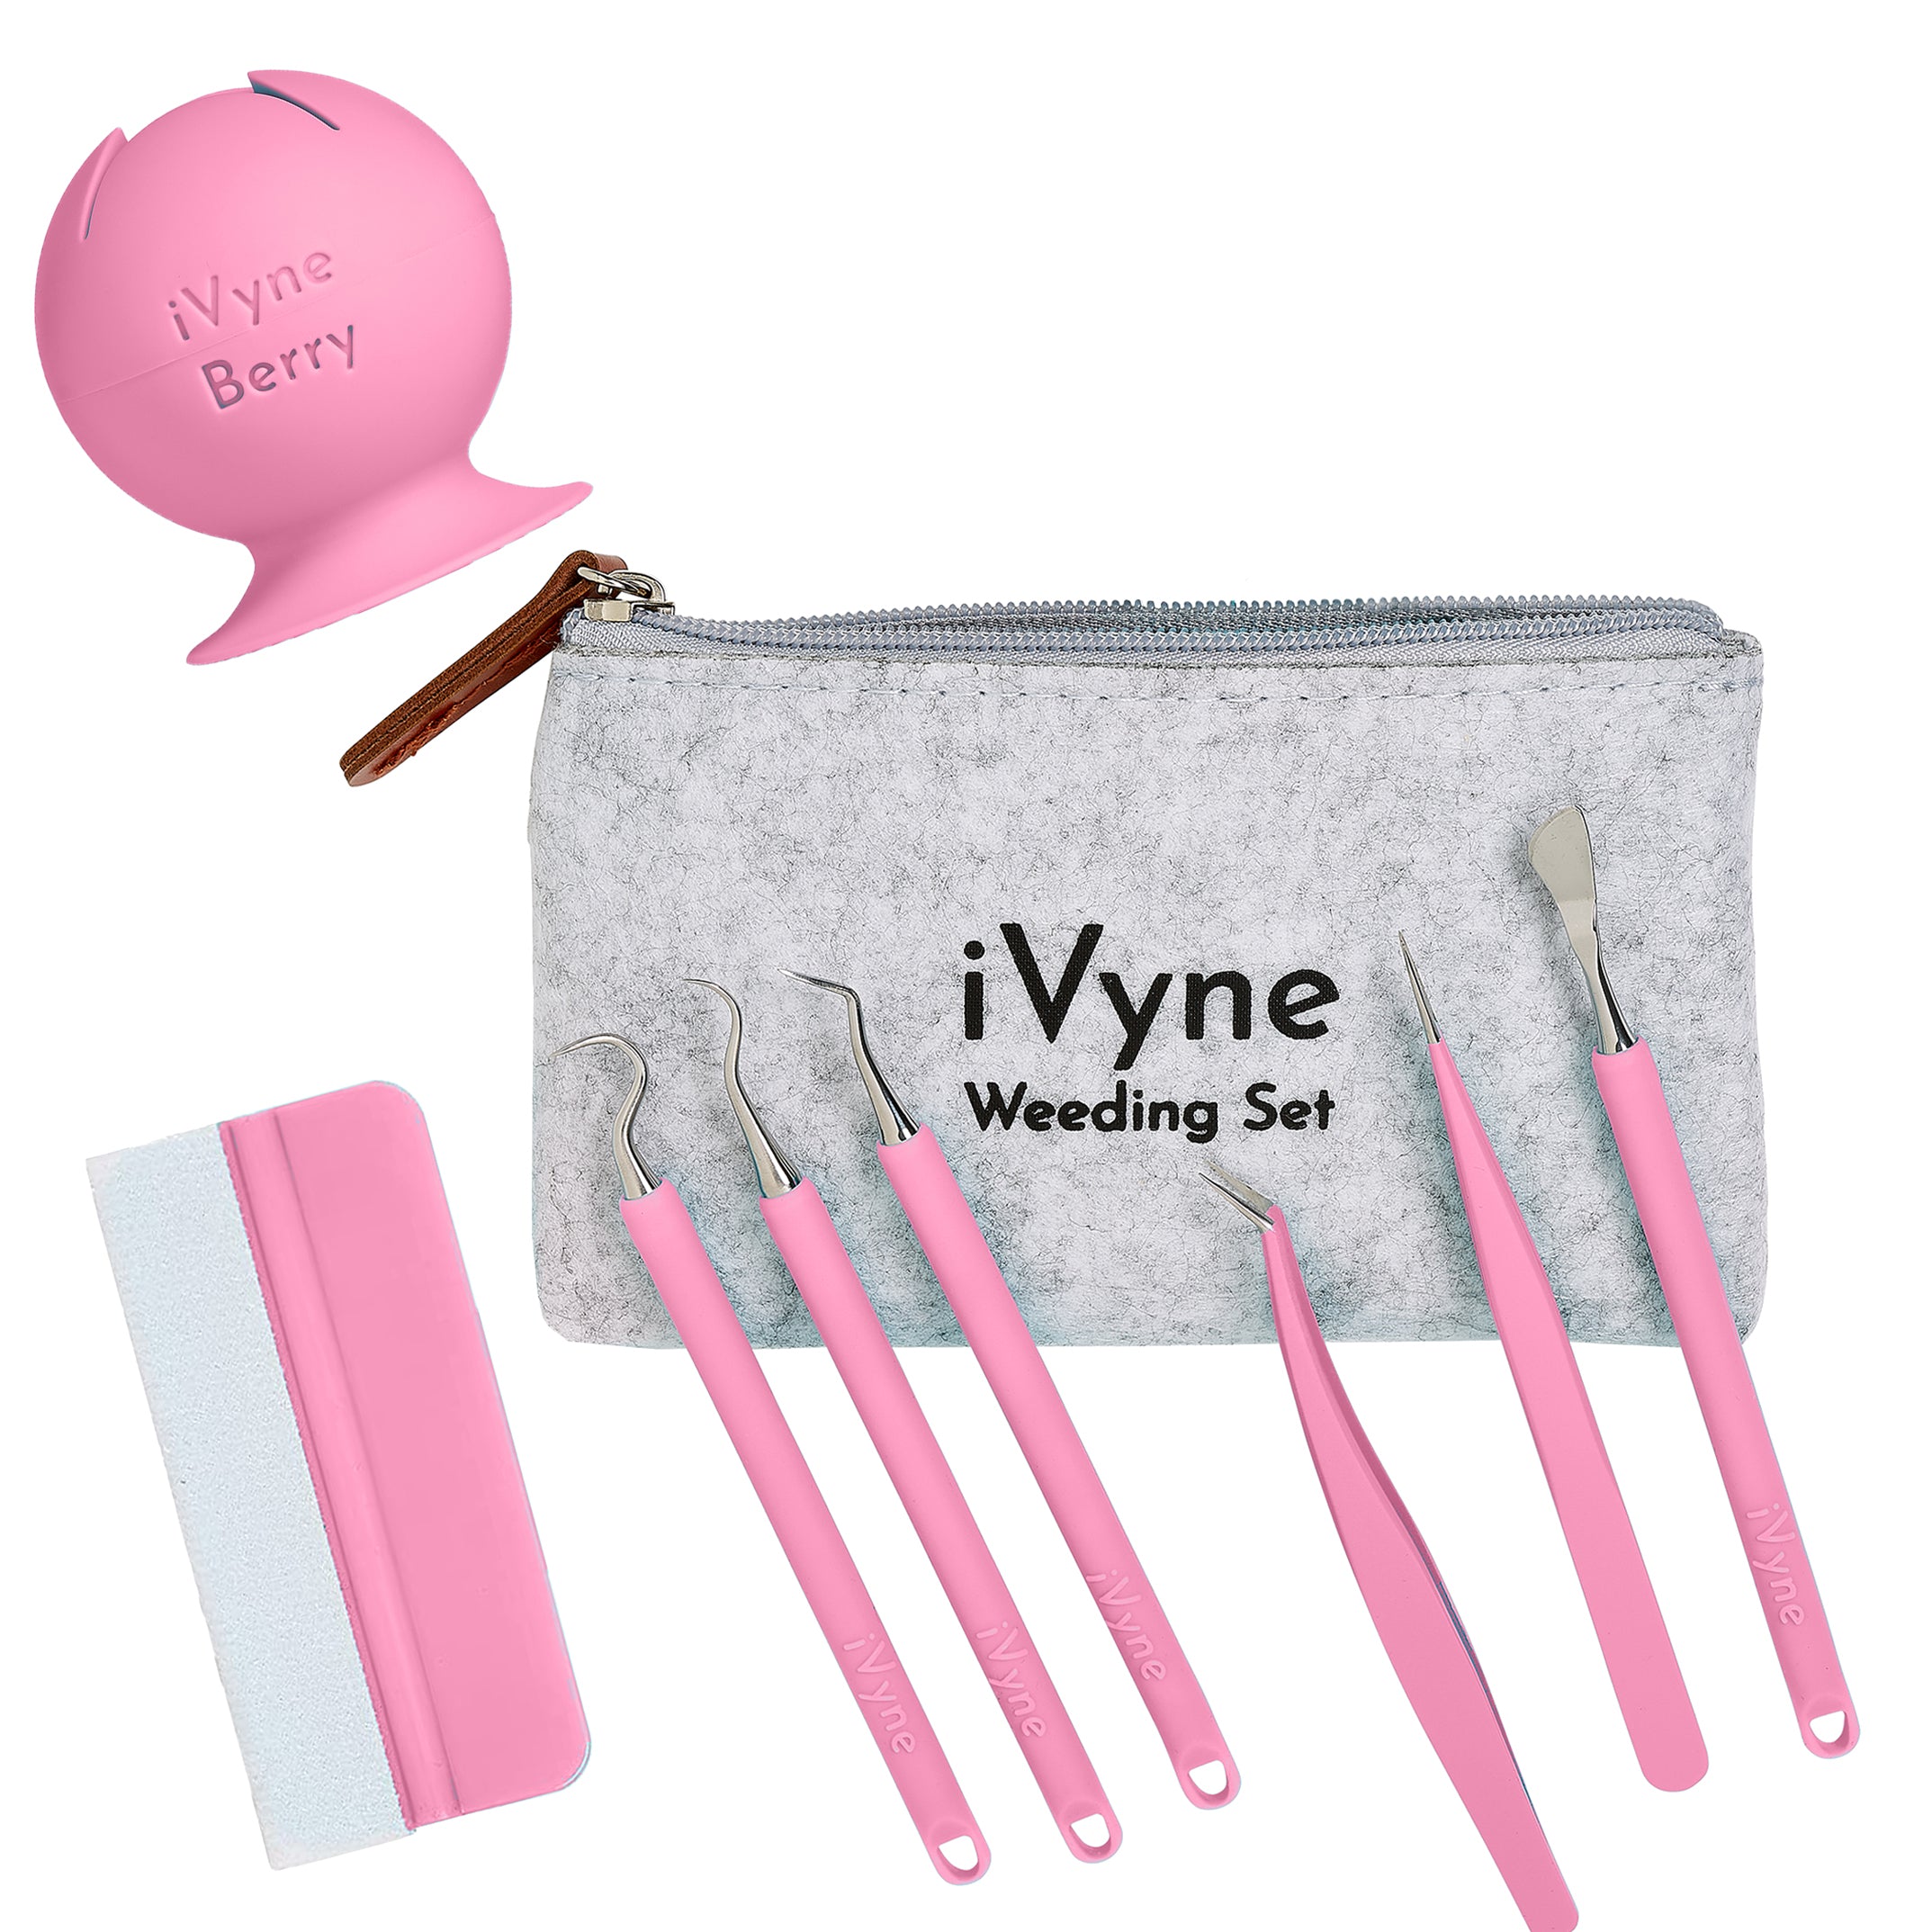  iVyne Complete Set Rechargeable A4 Light Pad, Weeding Tools for  Vinyl, Weeding Scrap Collector for Cricut and Silhouette Machines for  Weeding, Tracing, Drawing Projects - Blue : Clothing, Shoes & Jewelry